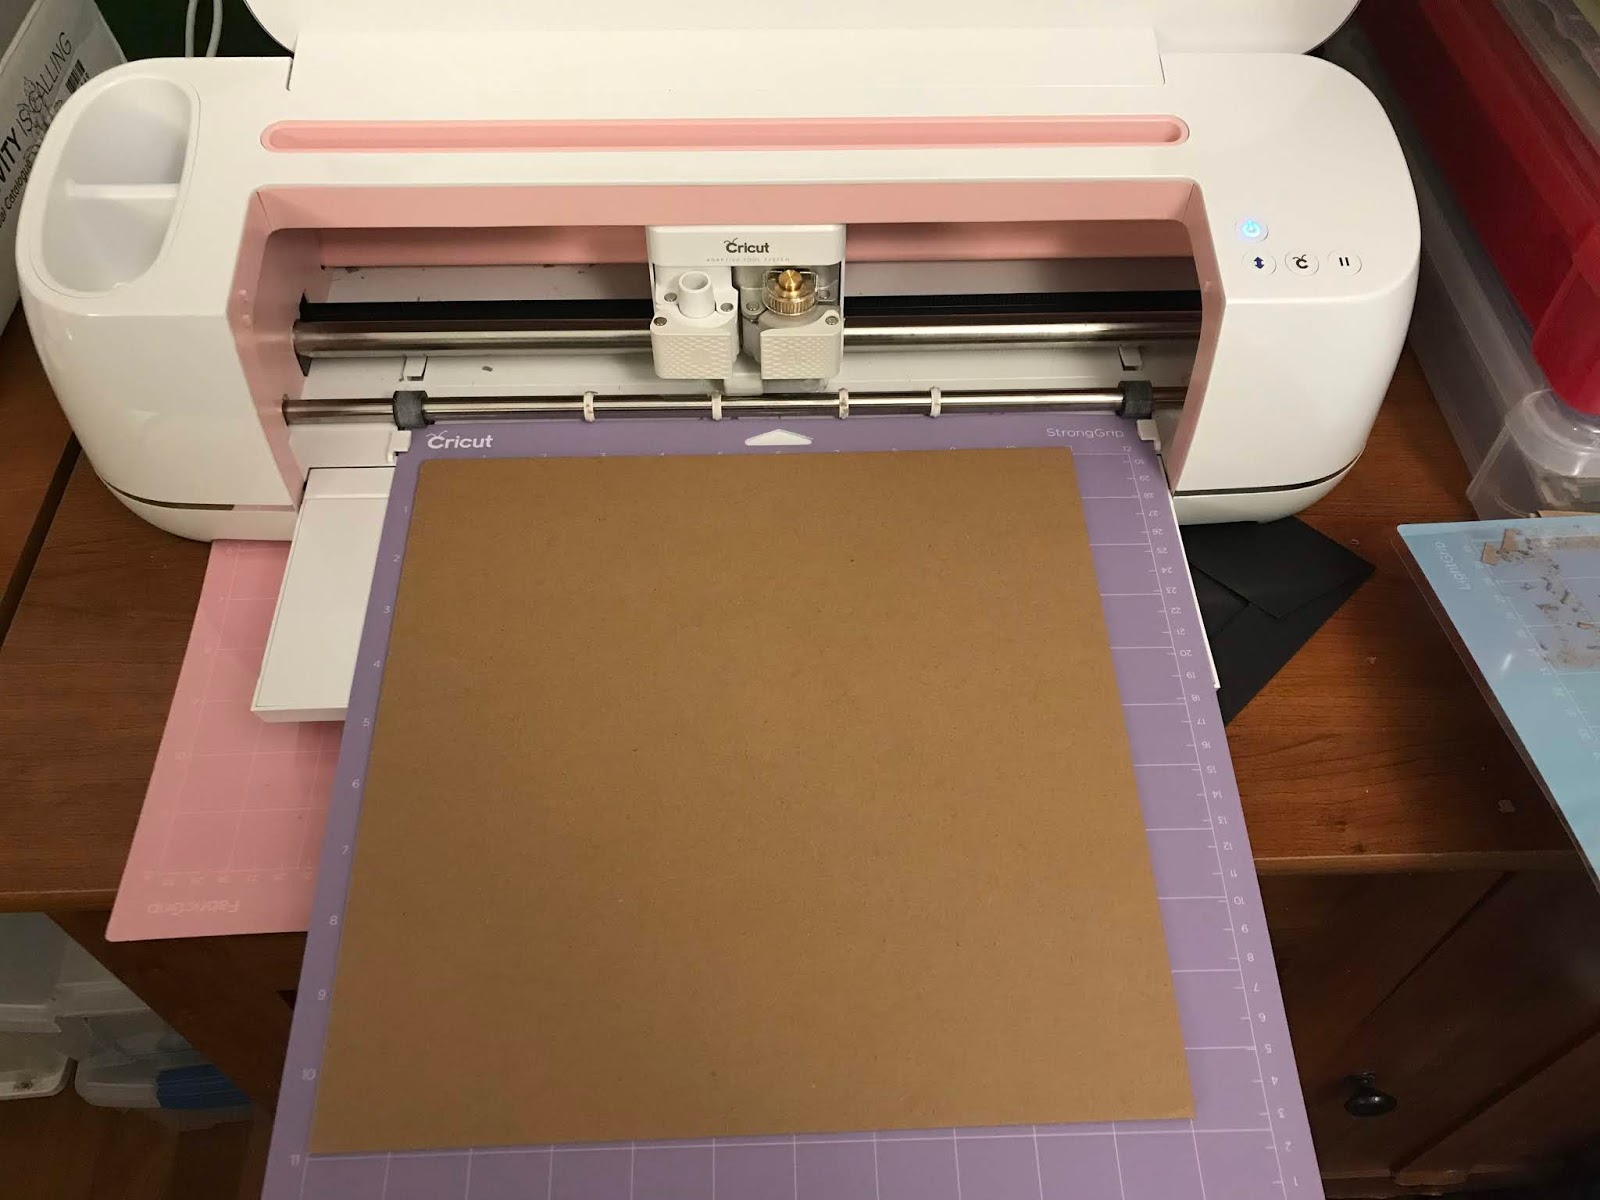 Small Workshop Chronicles: Using a Cricut Maker as a Poor Man's